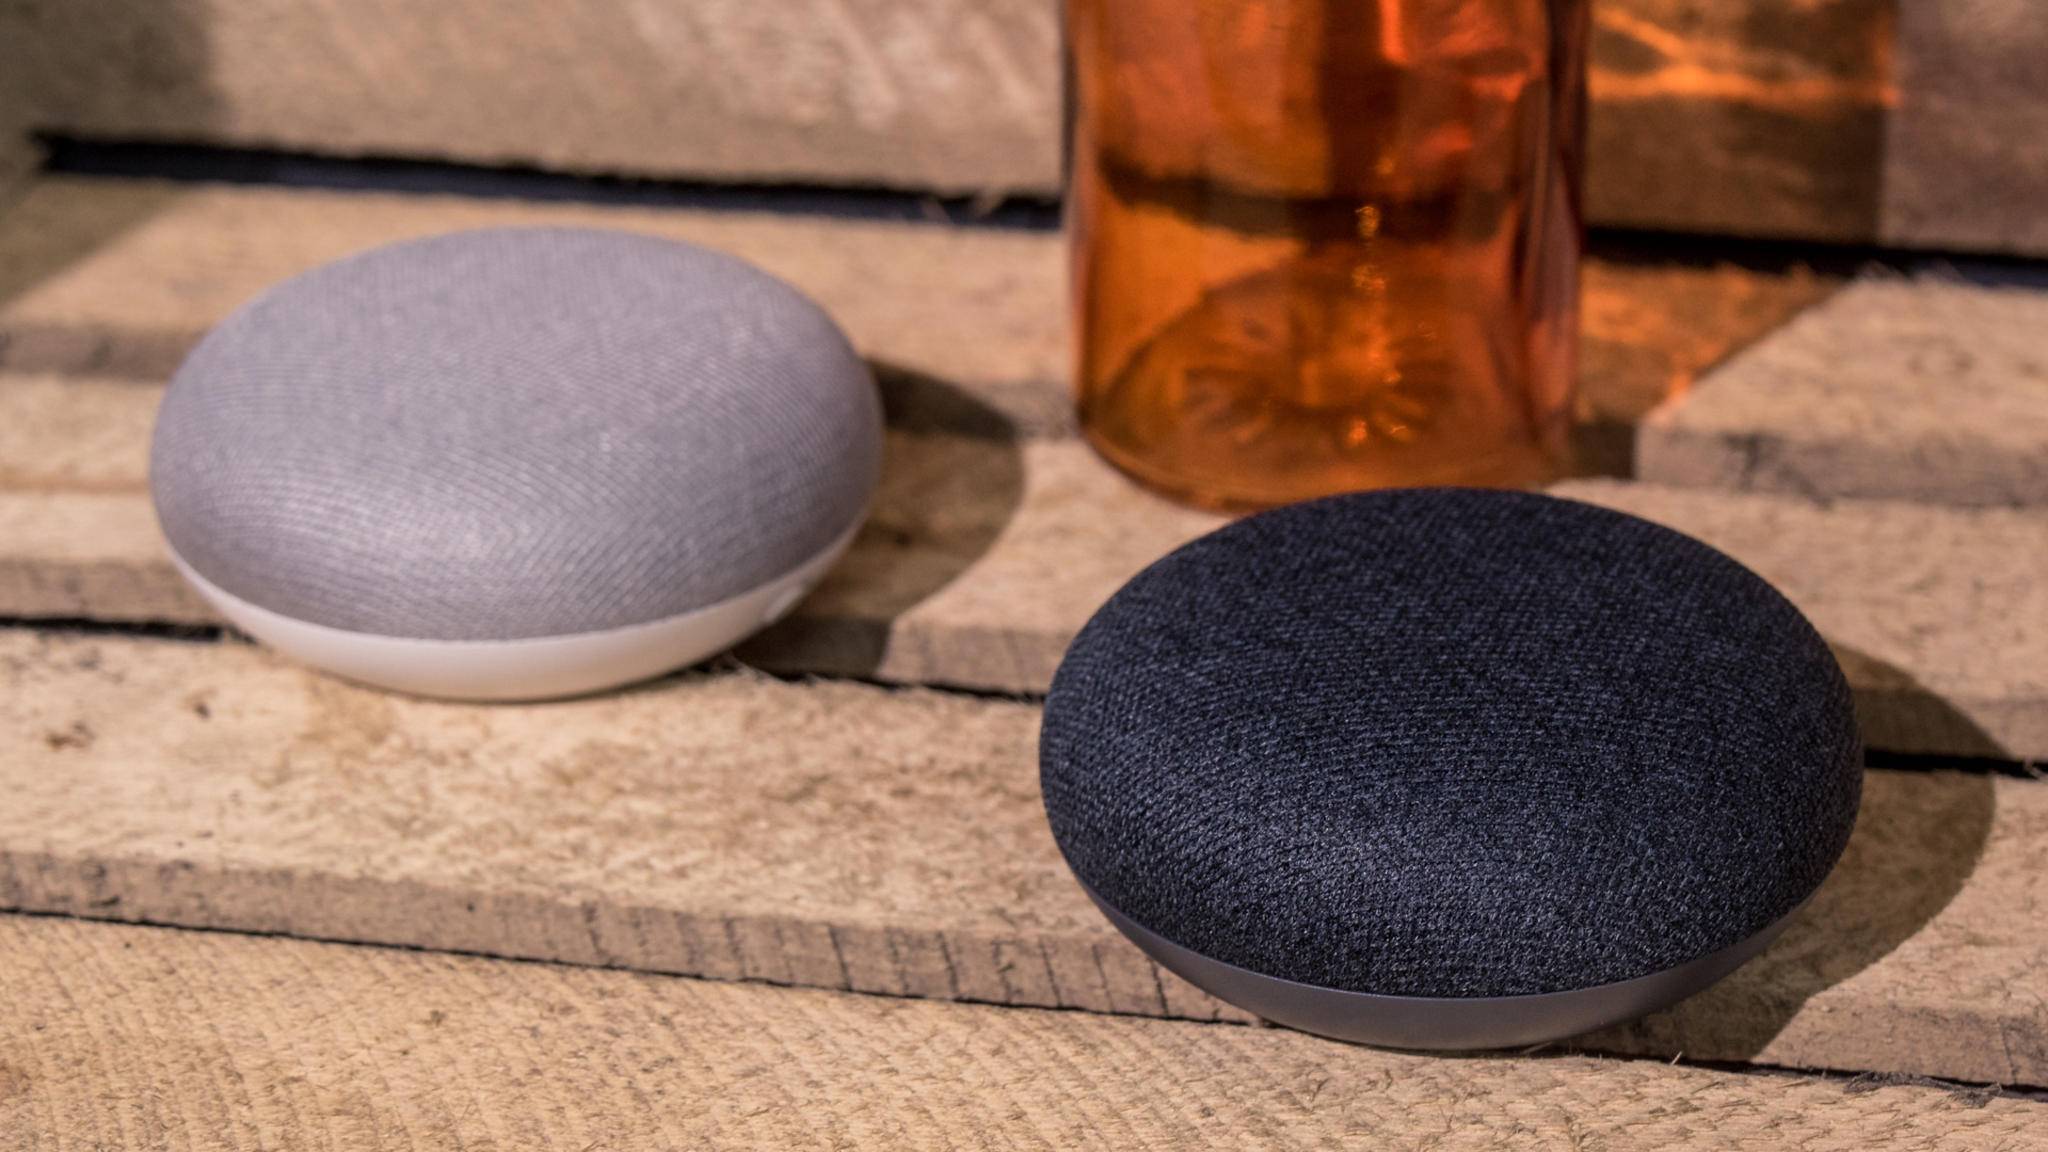 How To Add Another Google Mini To My Google Home